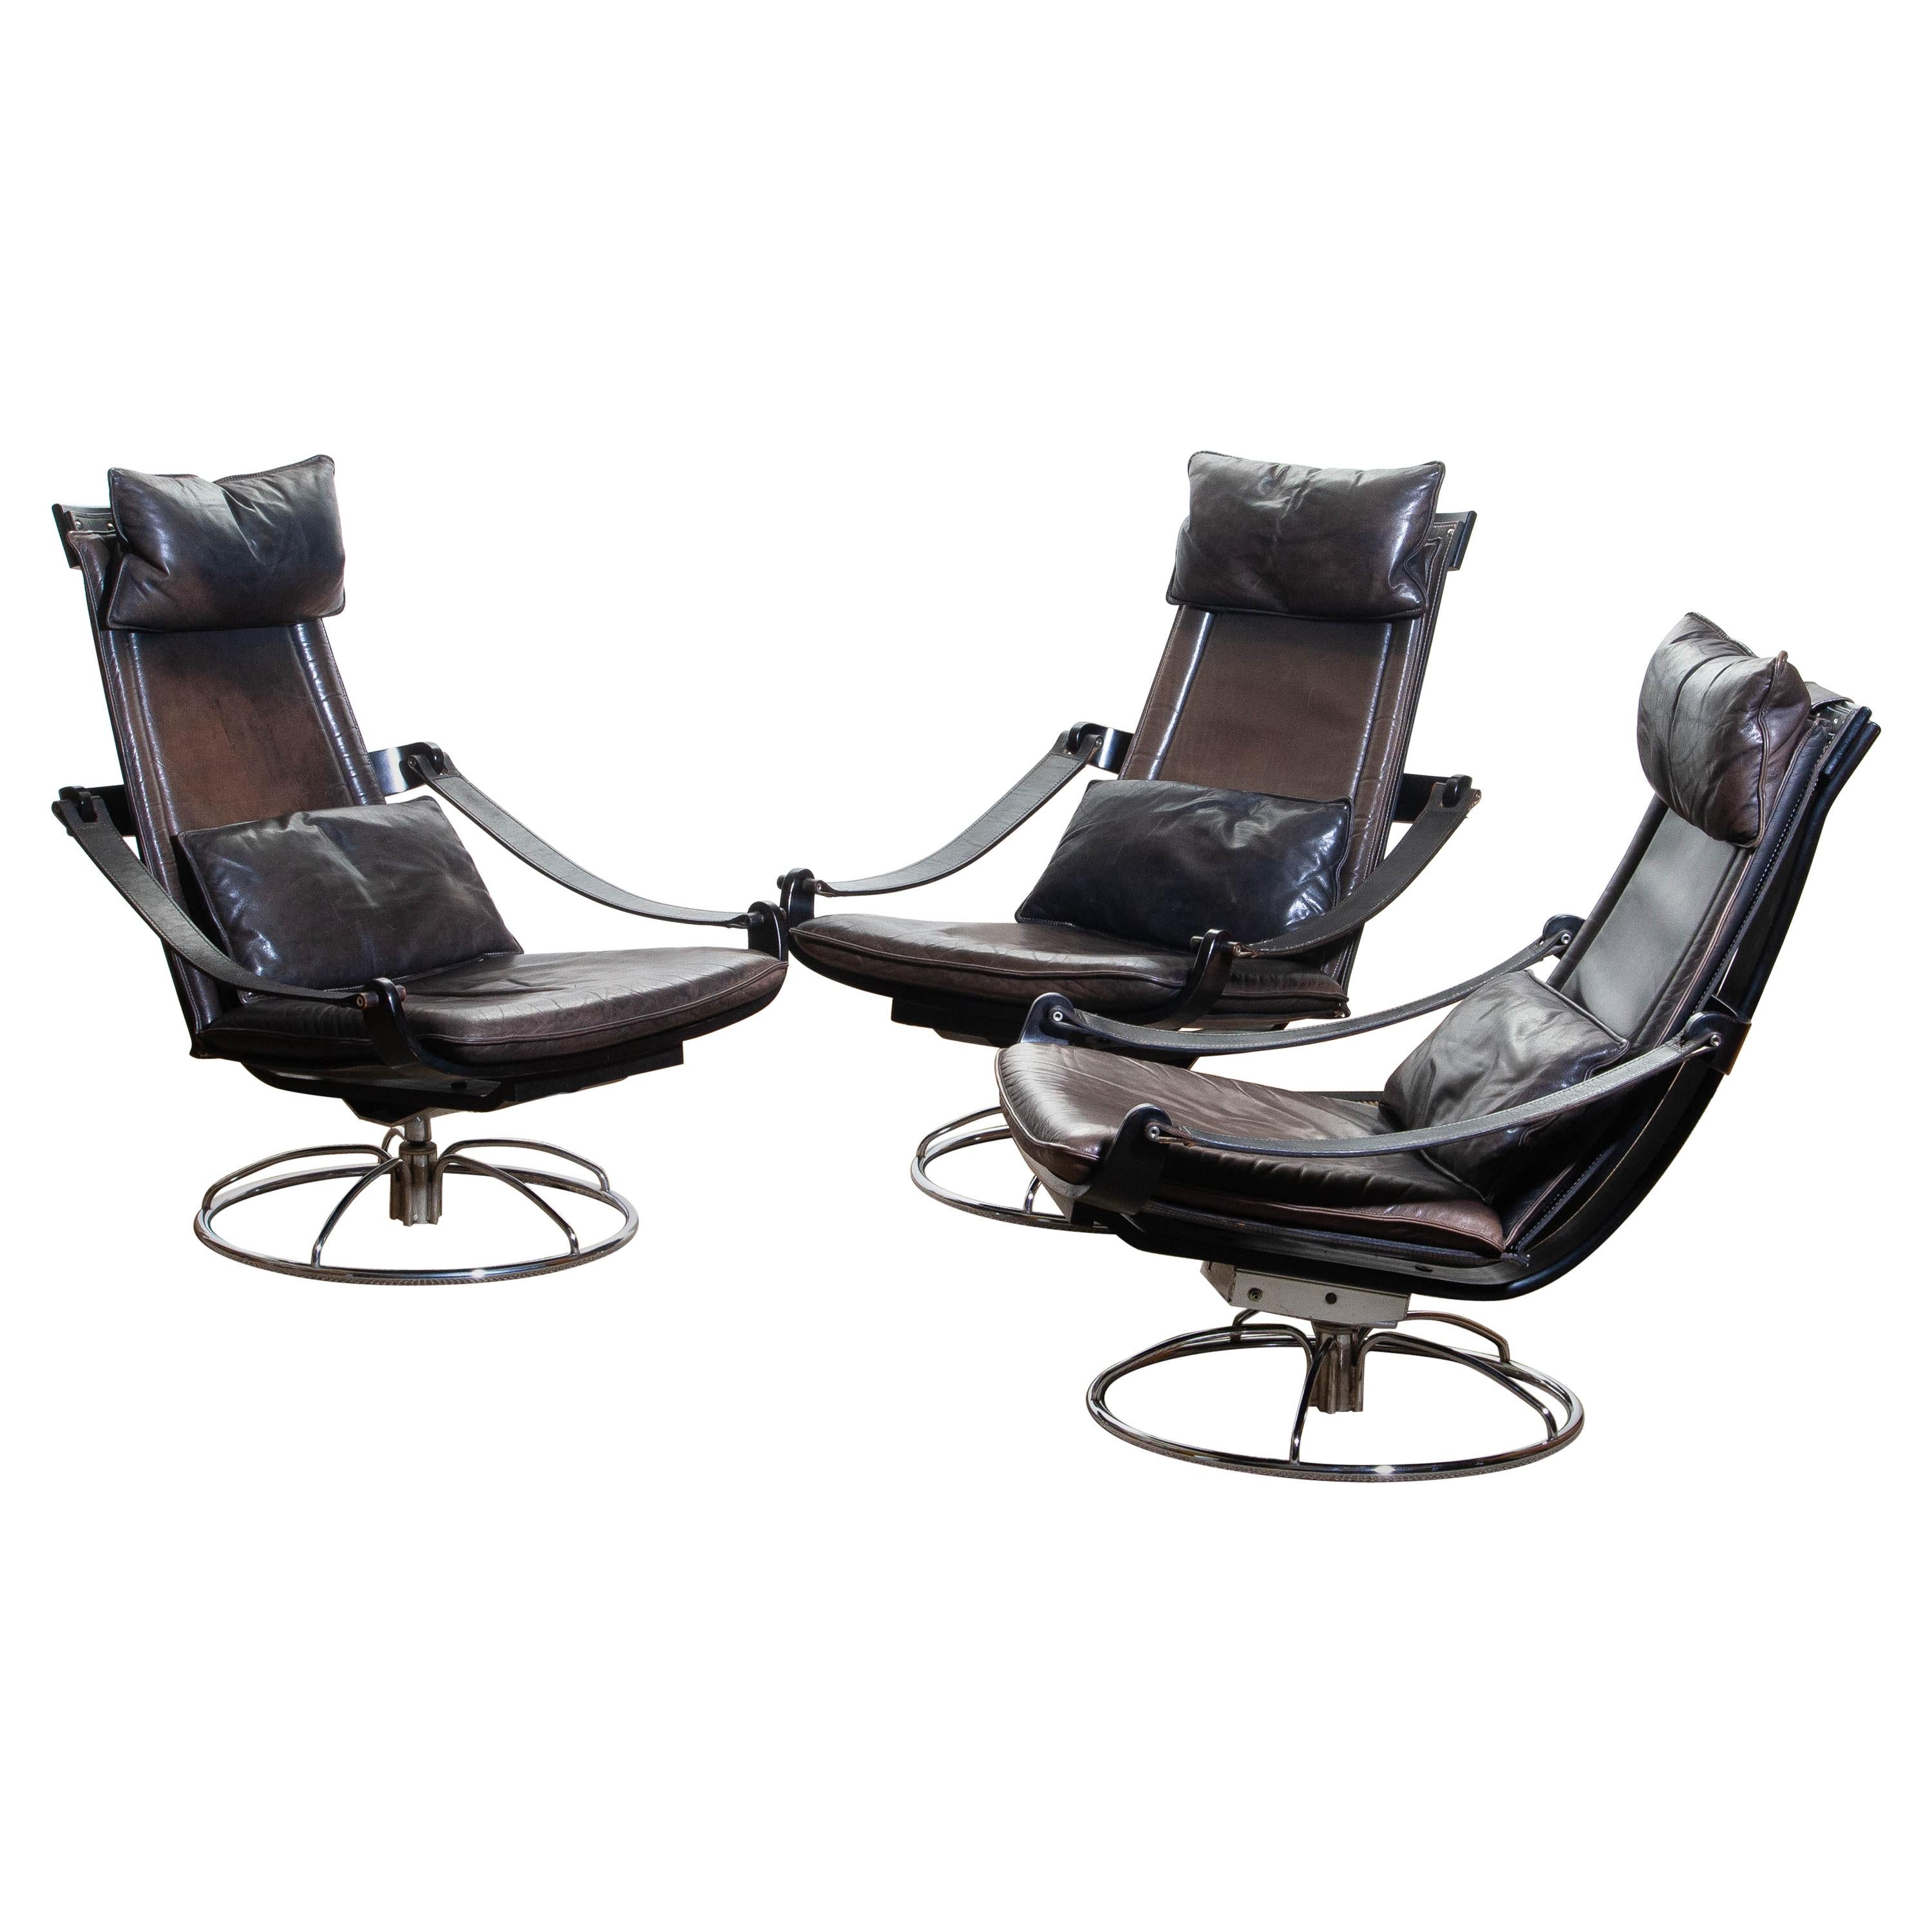 1970s, Three Leather Swivel / Relax Chairs By Ake Fribytter For Nelo, Sweden